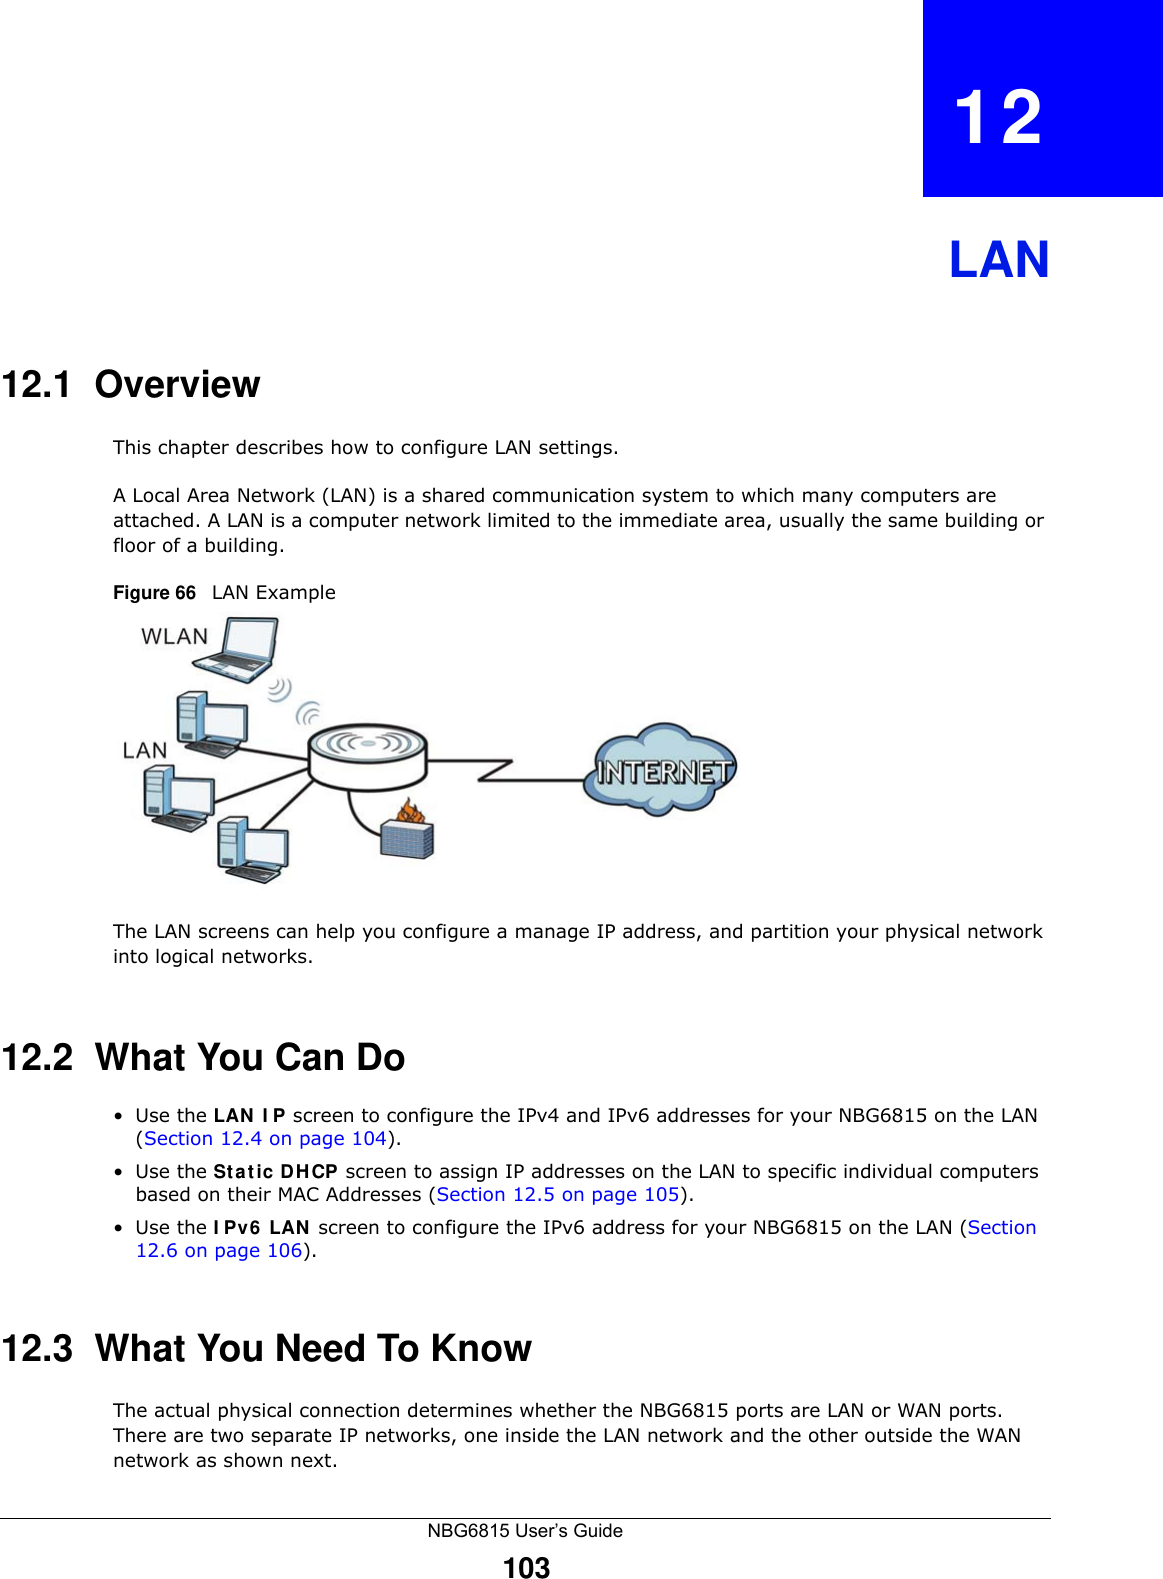 NBG6815 User’s Guide103CHAPTER   12LAN12.1  OverviewThis chapter describes how to configure LAN settings.A Local Area Network (LAN) is a shared communication system to which many computers are attached. A LAN is a computer network limited to the immediate area, usually the same building or floor of a building. Figure 66   LAN ExampleThe LAN screens can help you configure a manage IP address, and partition your physical network into logical networks.12.2  What You Can Do•Use the LAN IP screen to configure the IPv4 and IPv6 addresses for your NBG6815 on the LAN (Section 12.4 on page 104).•Use the Static DHCP screen to assign IP addresses on the LAN to specific individual computers based on their MAC Addresses (Section 12.5 on page 105).•Use the IPv6 LAN screen to configure the IPv6 address for your NBG6815 on the LAN (Section 12.6 on page 106).12.3  What You Need To KnowThe actual physical connection determines whether the NBG6815 ports are LAN or WAN ports. There are two separate IP networks, one inside the LAN network and the other outside the WAN network as shown next.